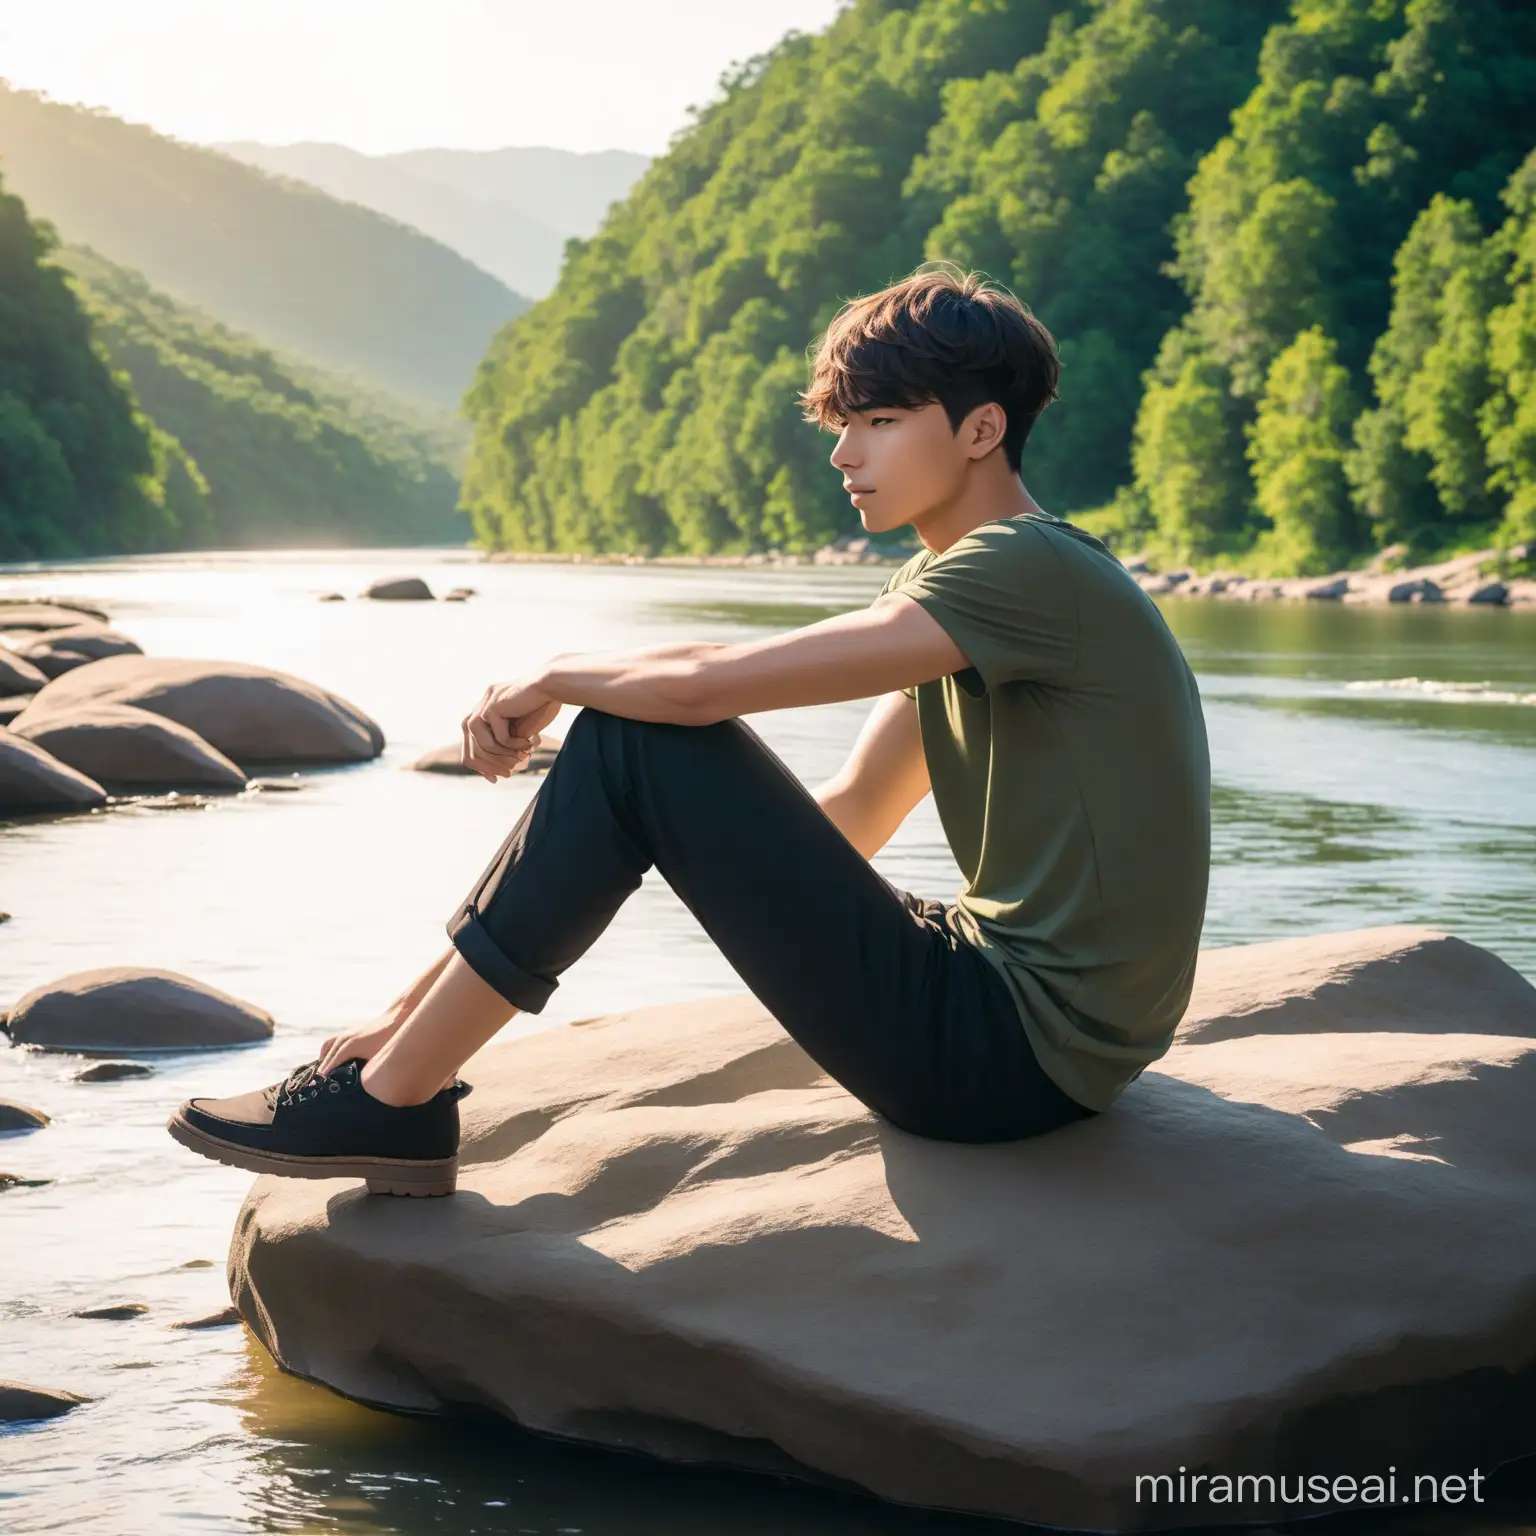 A young man sitting on a rock close to a river